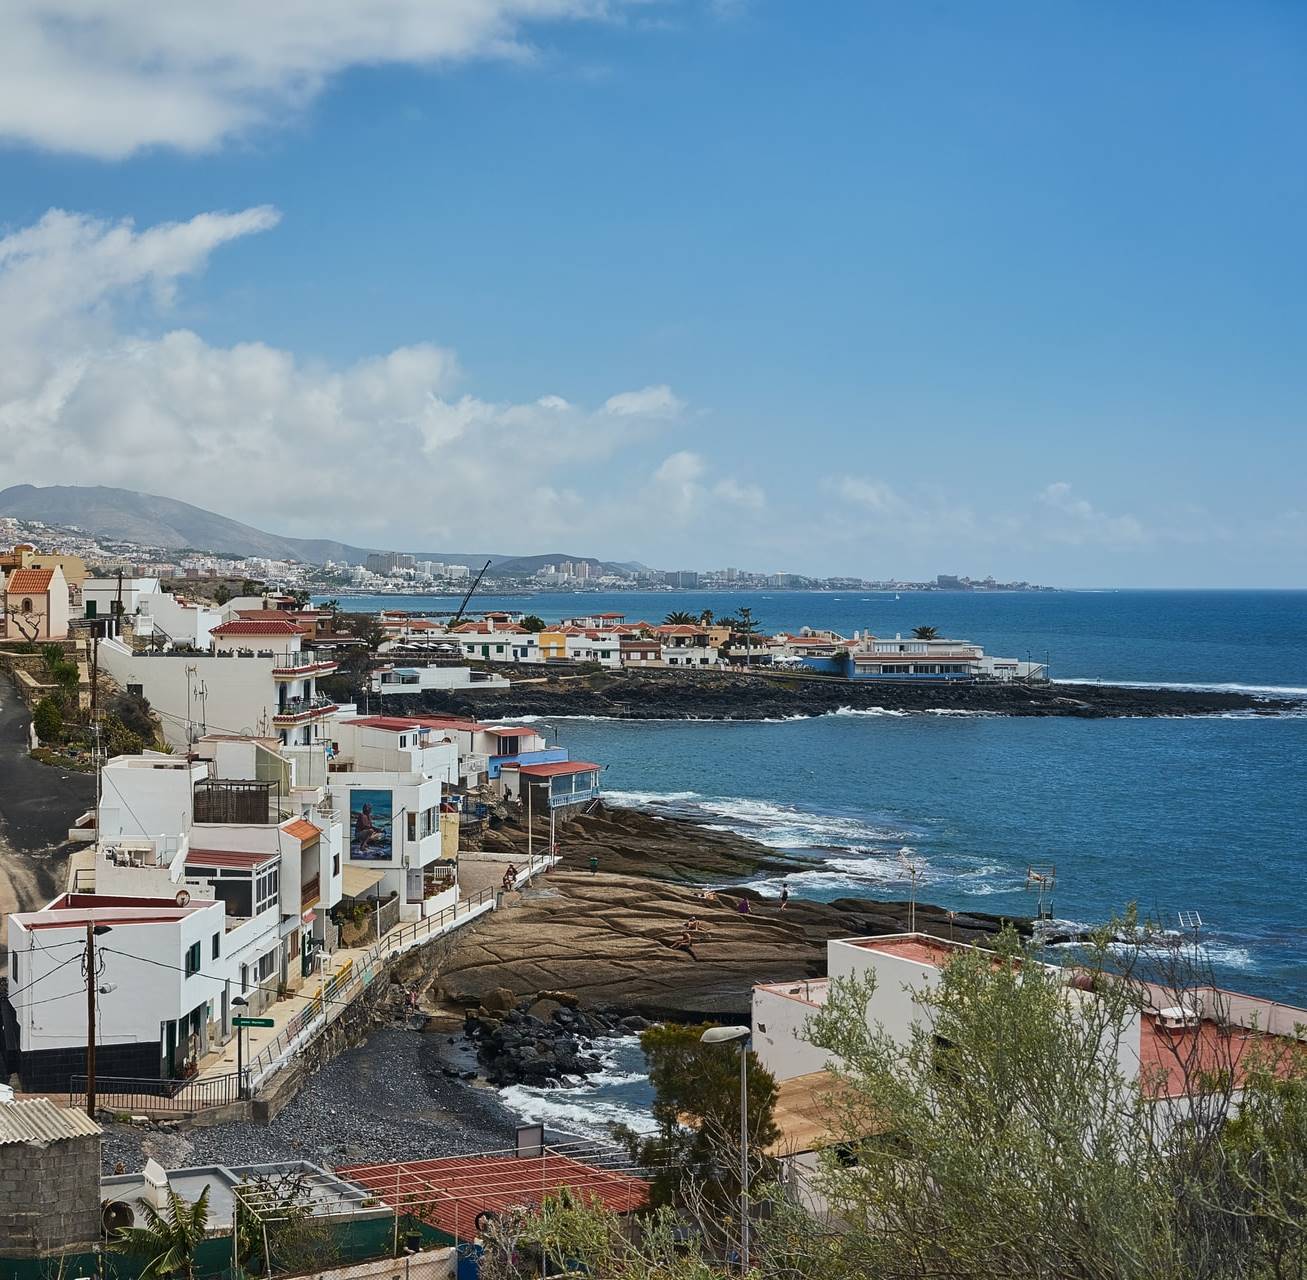 A small coastal town on the Canary Island of Tenerife.